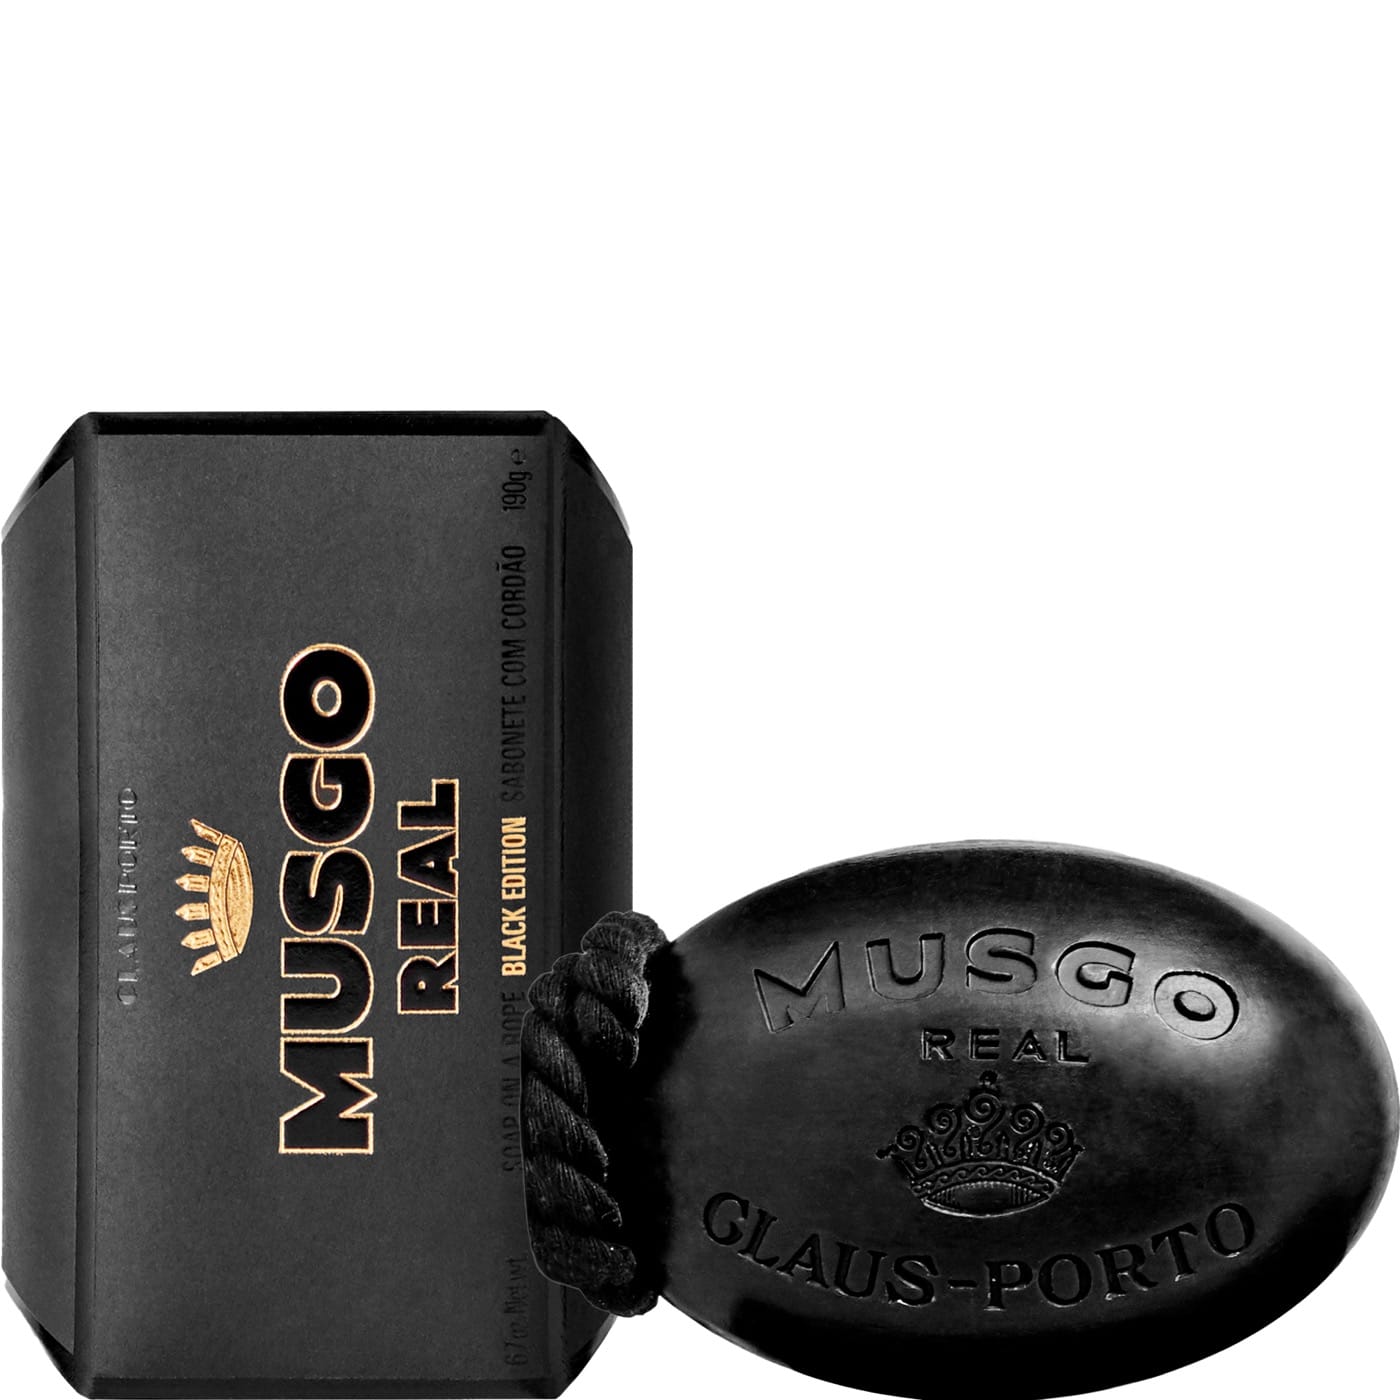 Musgo Real Soap on a Rope Black Edition 190gr - 1.1 - MR-199CC009